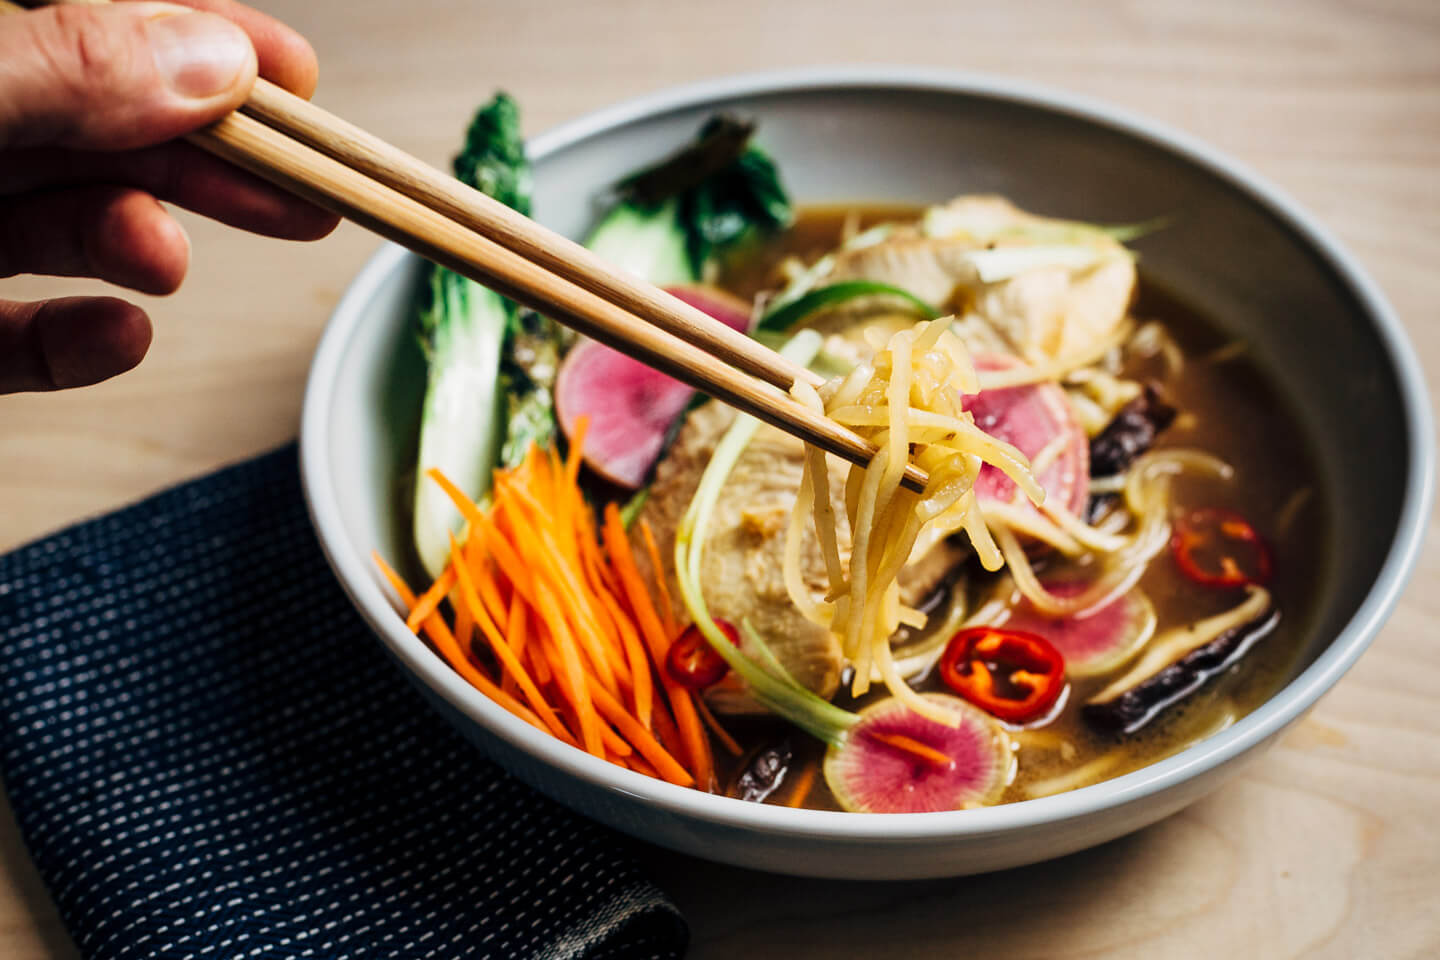 A restorative turnip noodle ramen recipe featuring tender turnip noodles and a host of winter vegetables served in a rich ramen broth topped with juicy, flavorful steamed chicken breasts. Recipe is naturally gluten-free and includes a simple Whole30-compliant variation.